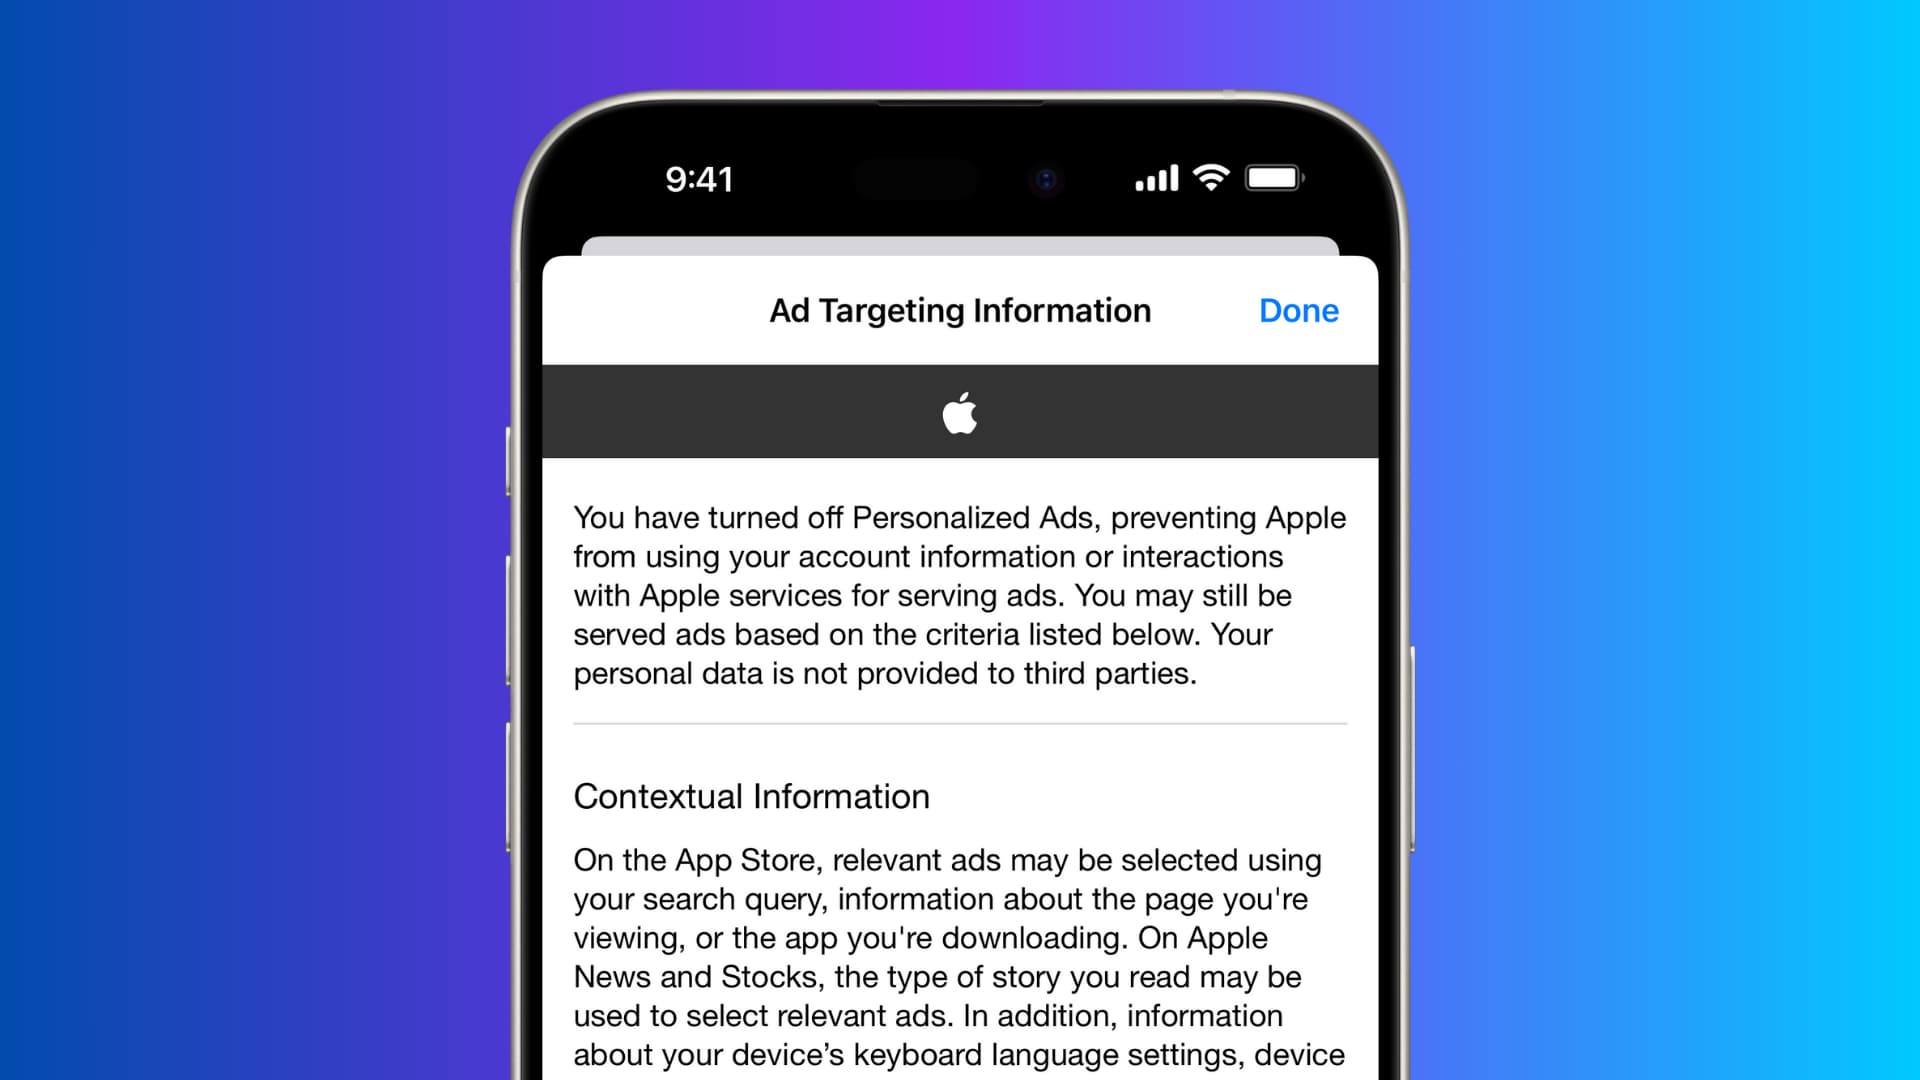 Apple Ad Targeting Information page on iPhone